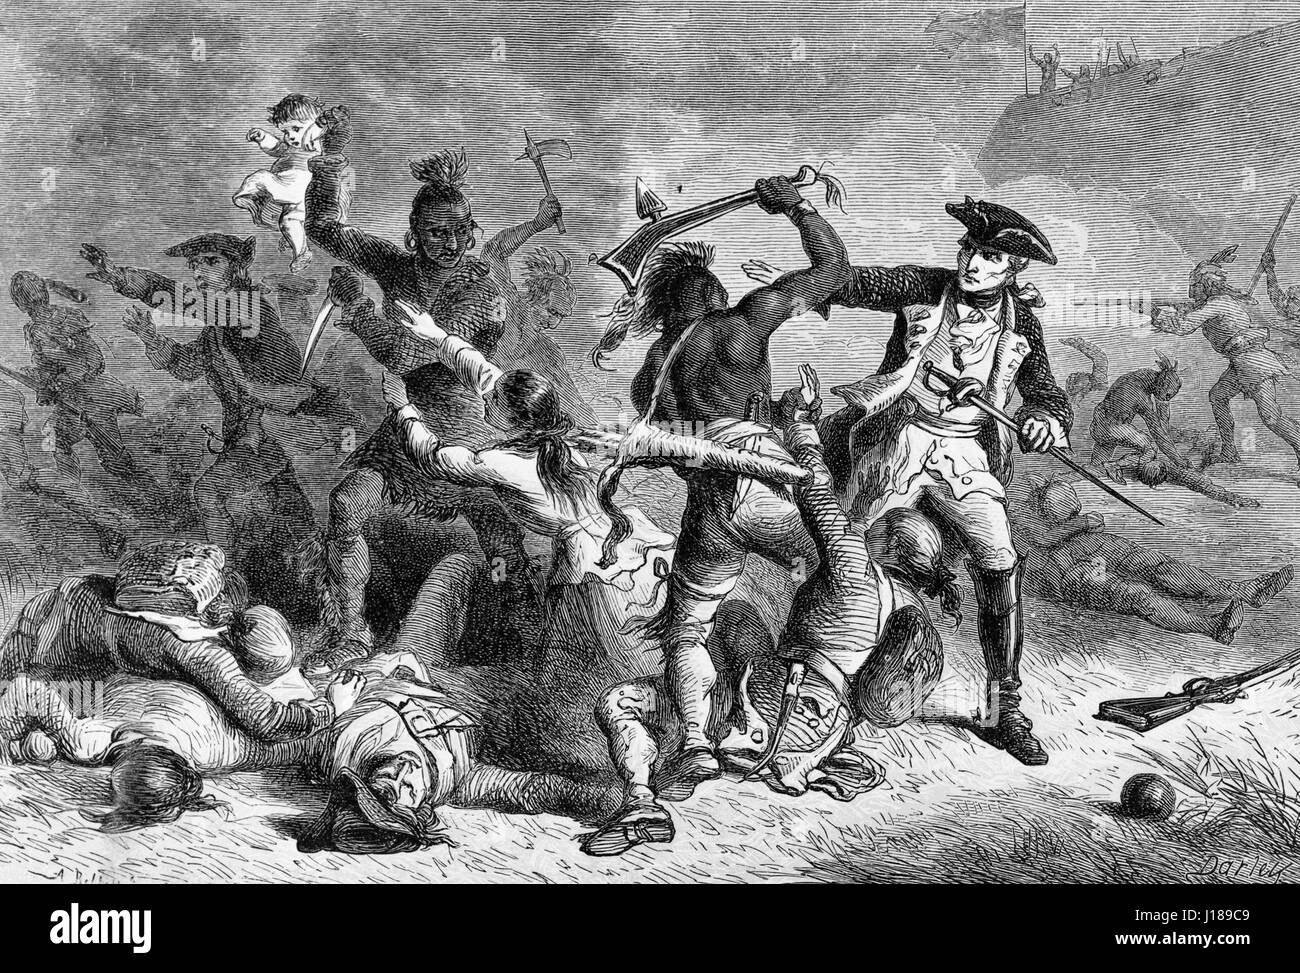 Louis-Joseph de Montcalm trying to stop Native Americans from attacking British soldiers and civilians as they leave Fort William Henry at the Battle of Fort William Henry during the French and Indian War Stock Photo